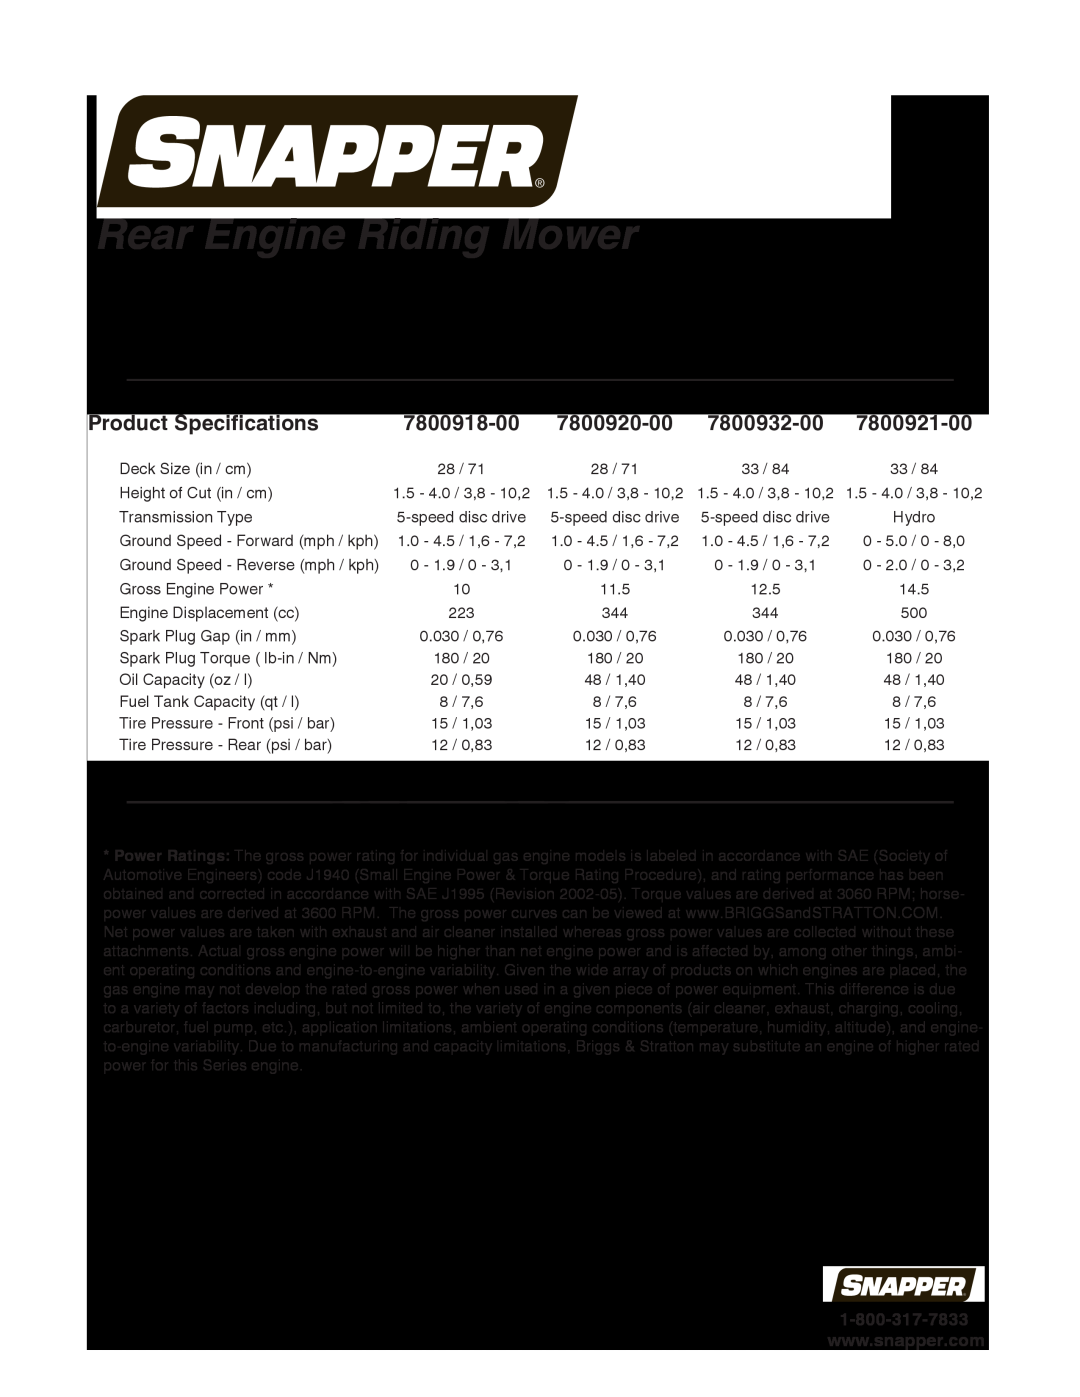 Snapper 7800920-00 Product Specifications, 7800918-00, 7800932-00, 7800921-00, Reproduction, Rear Engine Riding Mower 